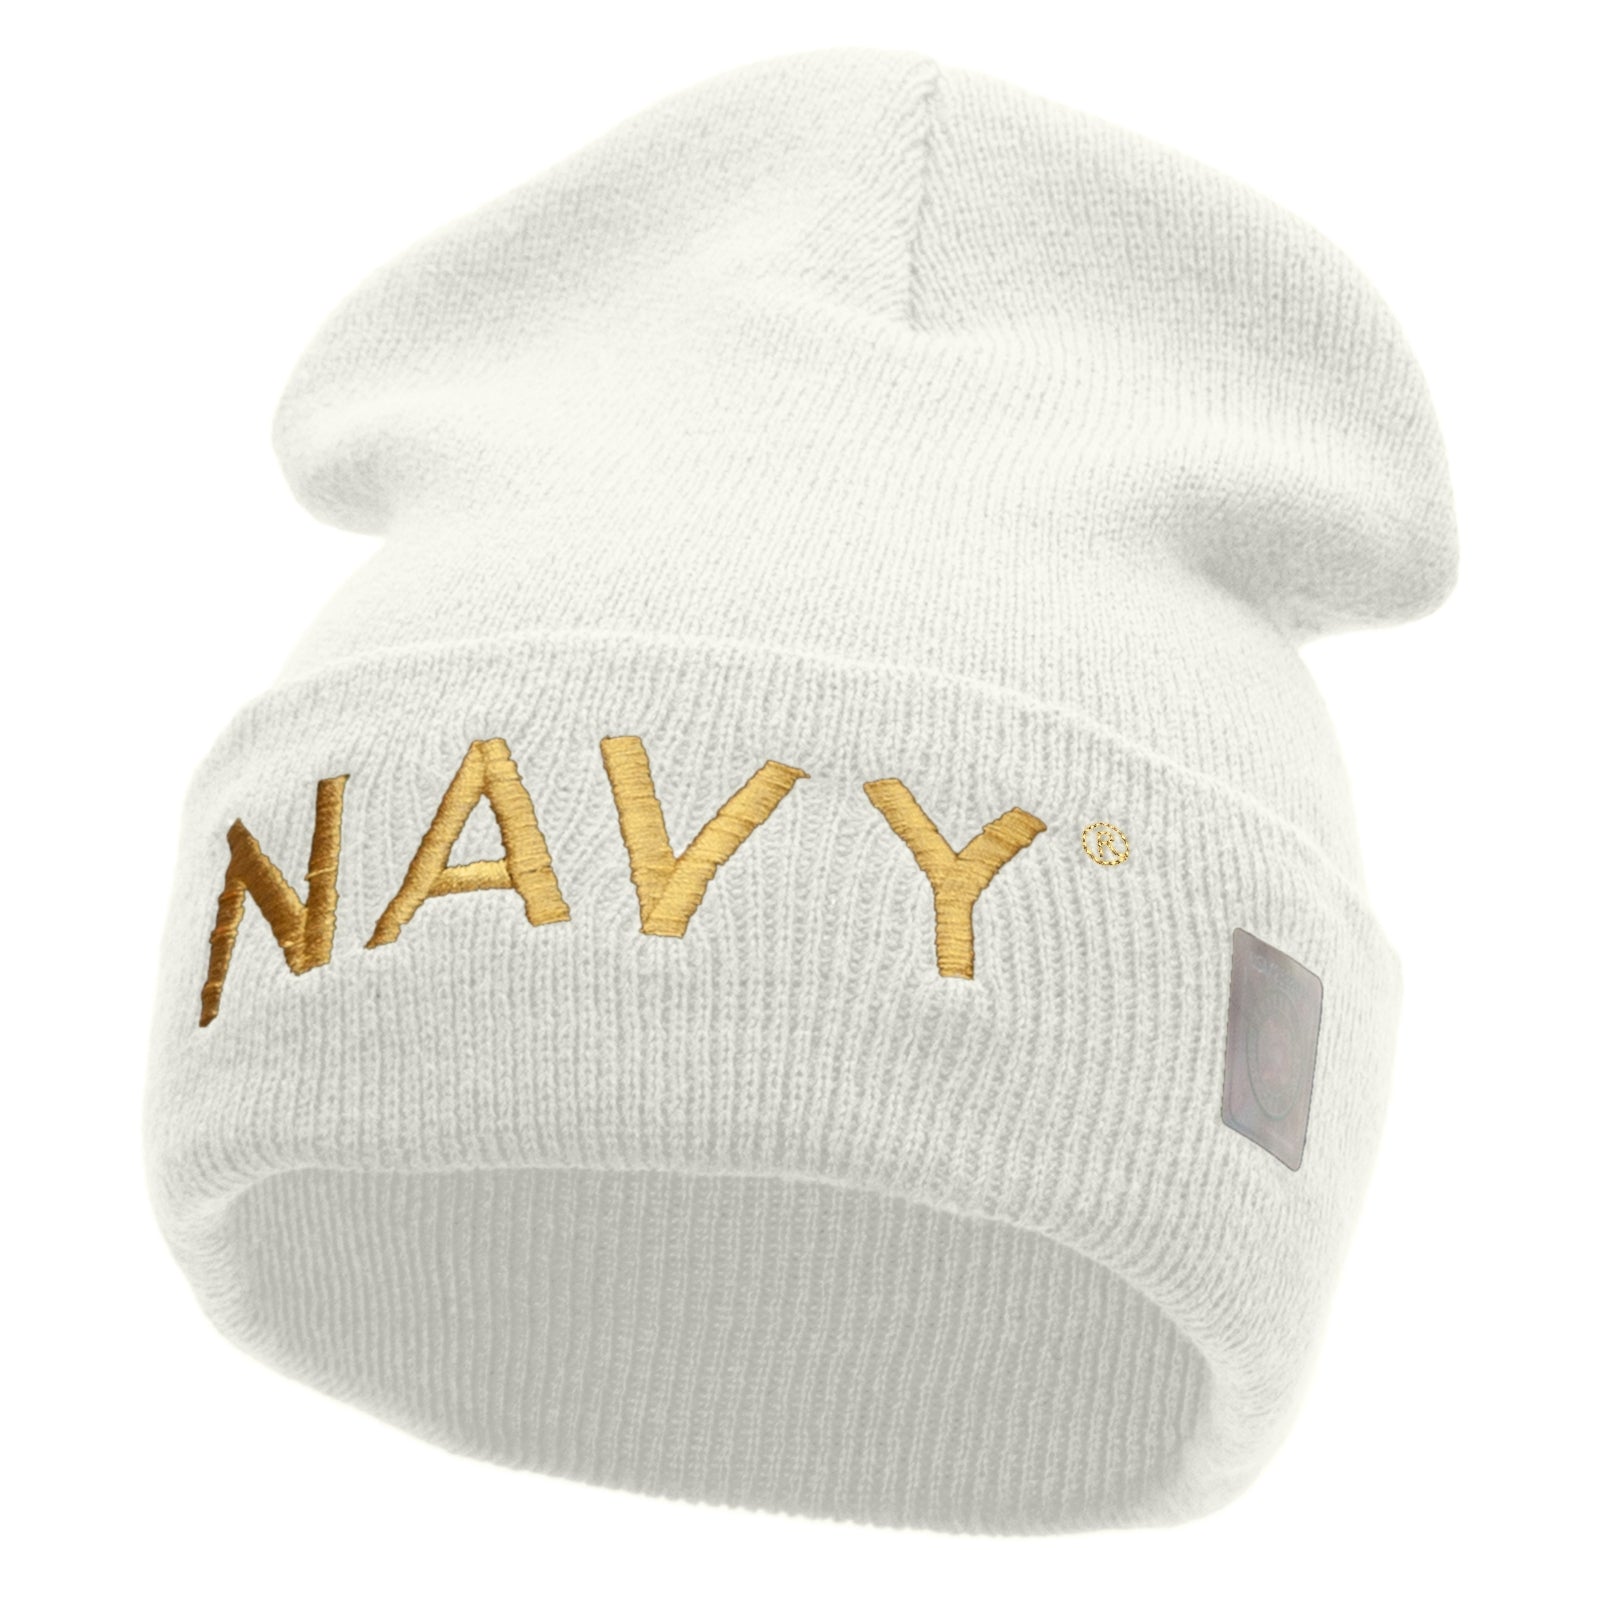 Licensed Navy Word Embroidered Long Beanie Made in USA - White OSFM